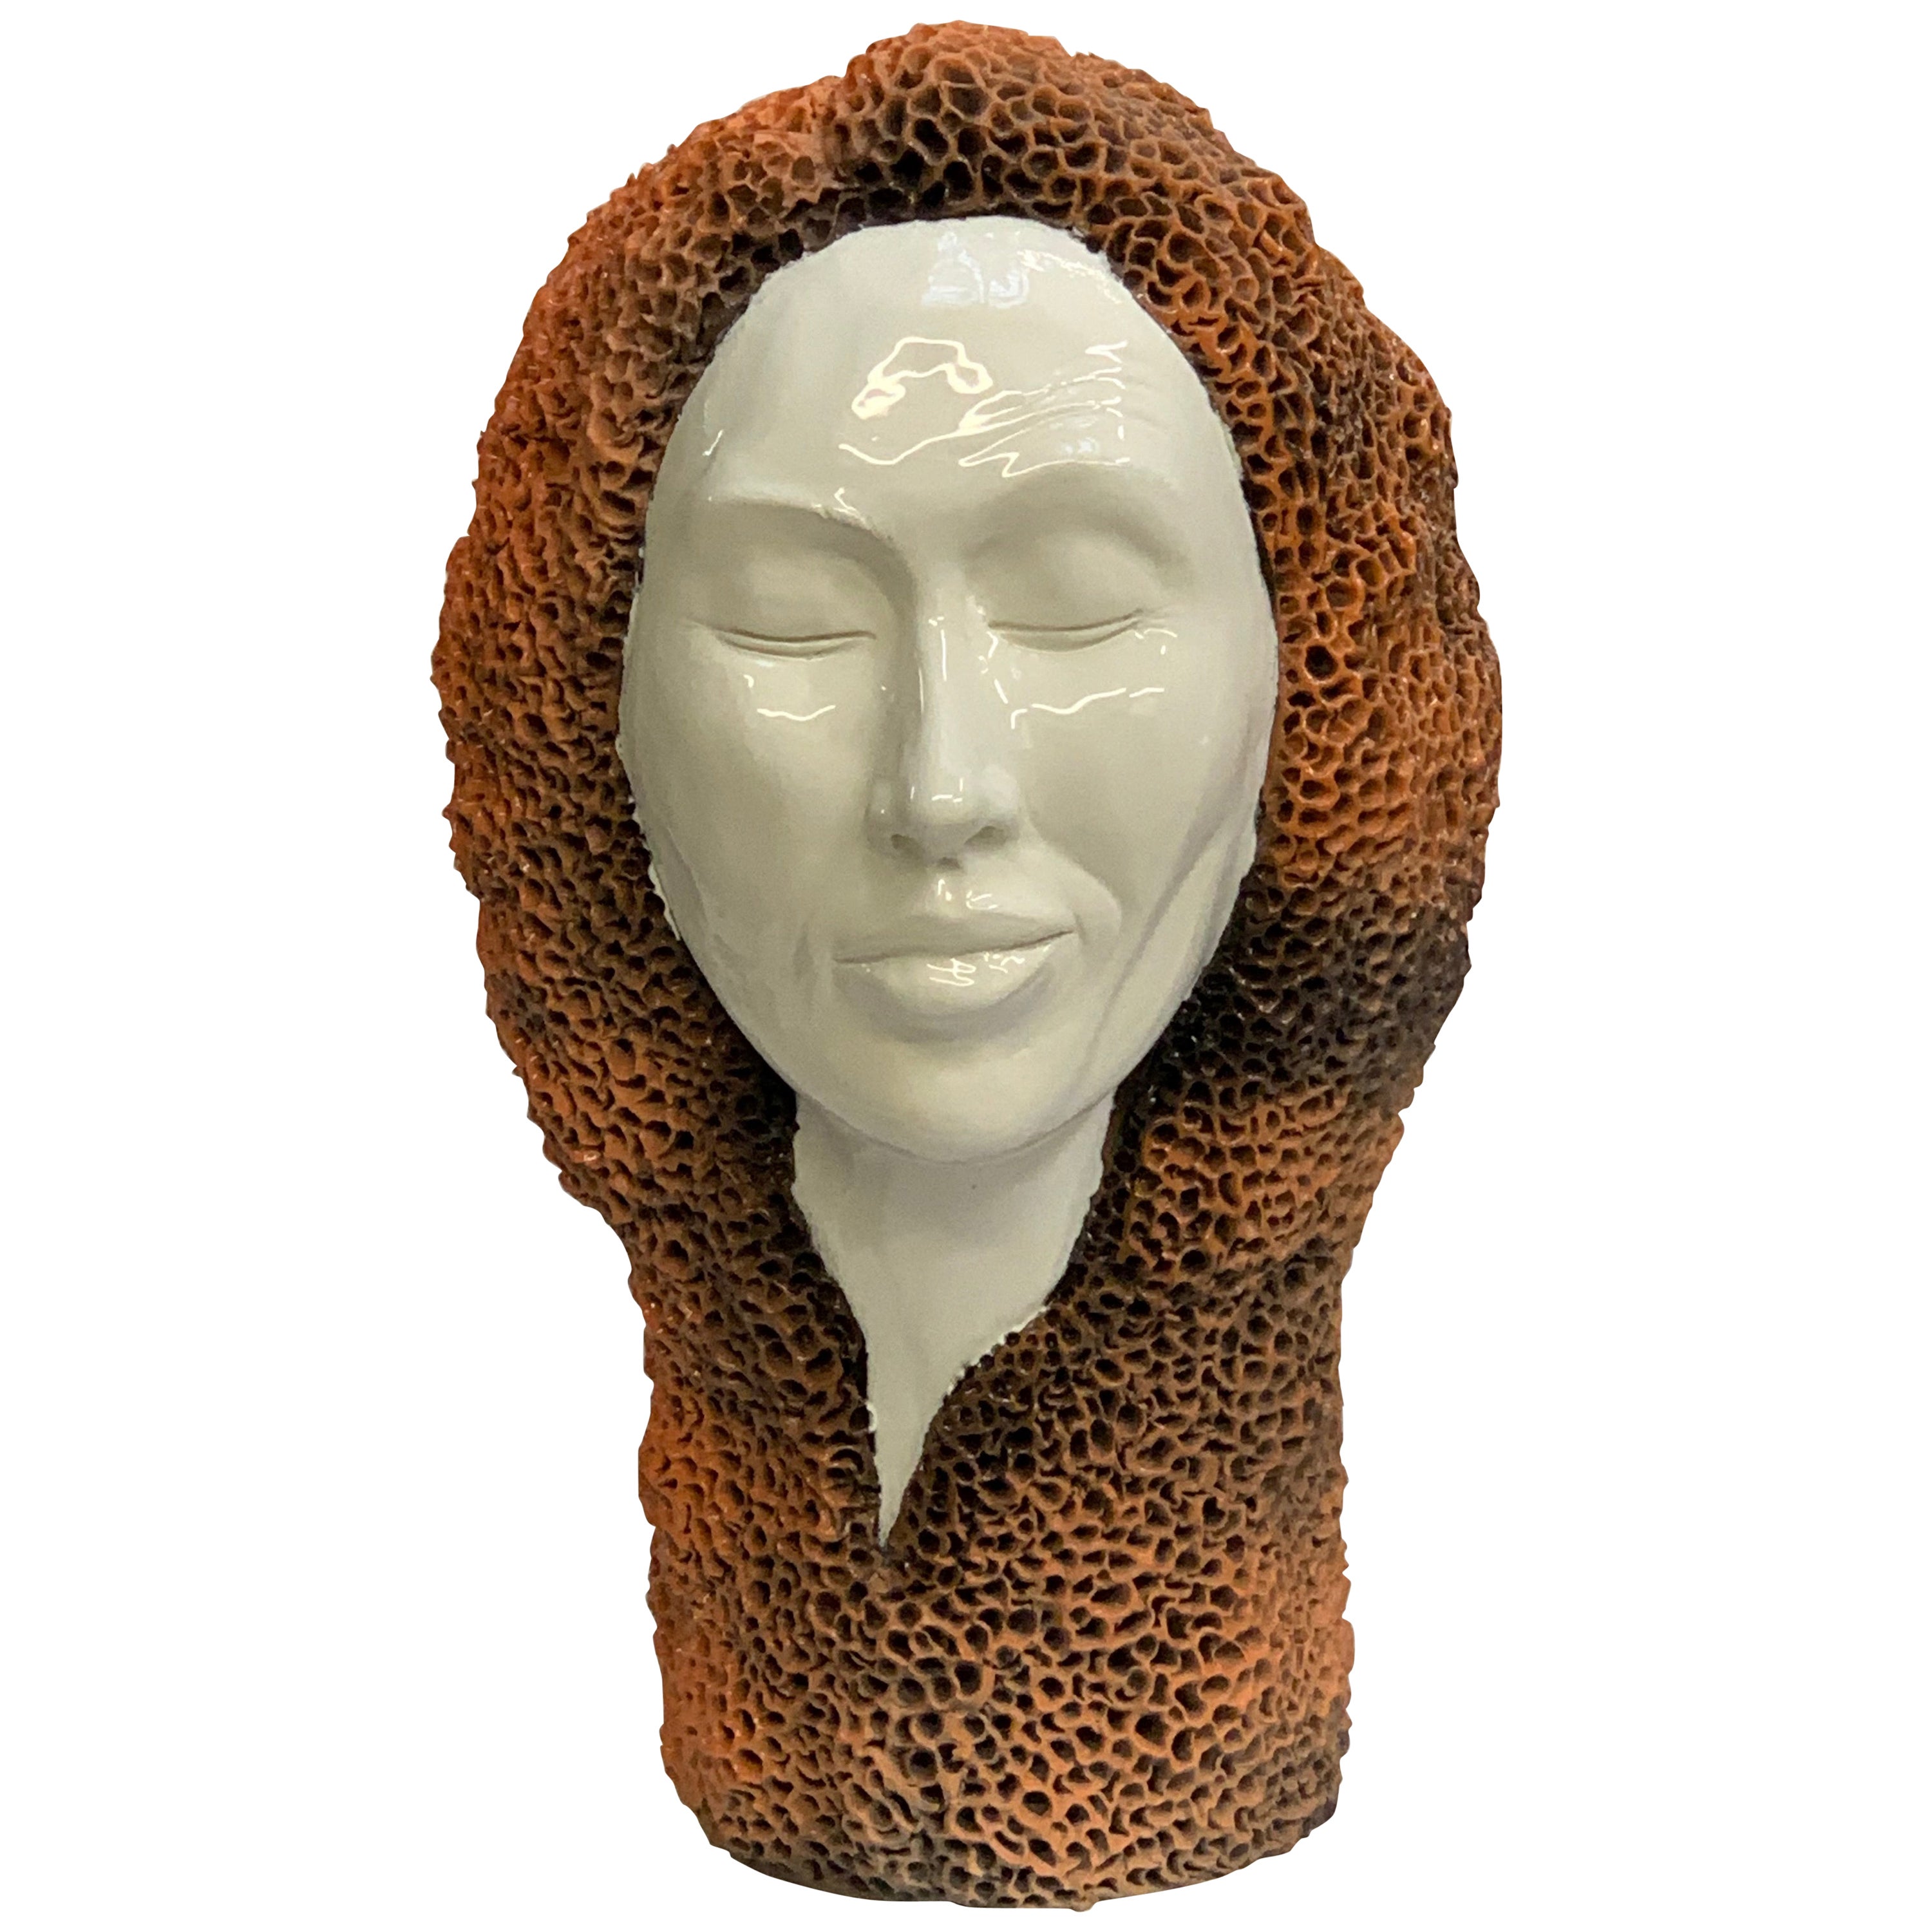 Woman's Head Sponge Decorative Ceramic Piece, Handmade Italy, 2021, Hand-Crafted For Sale